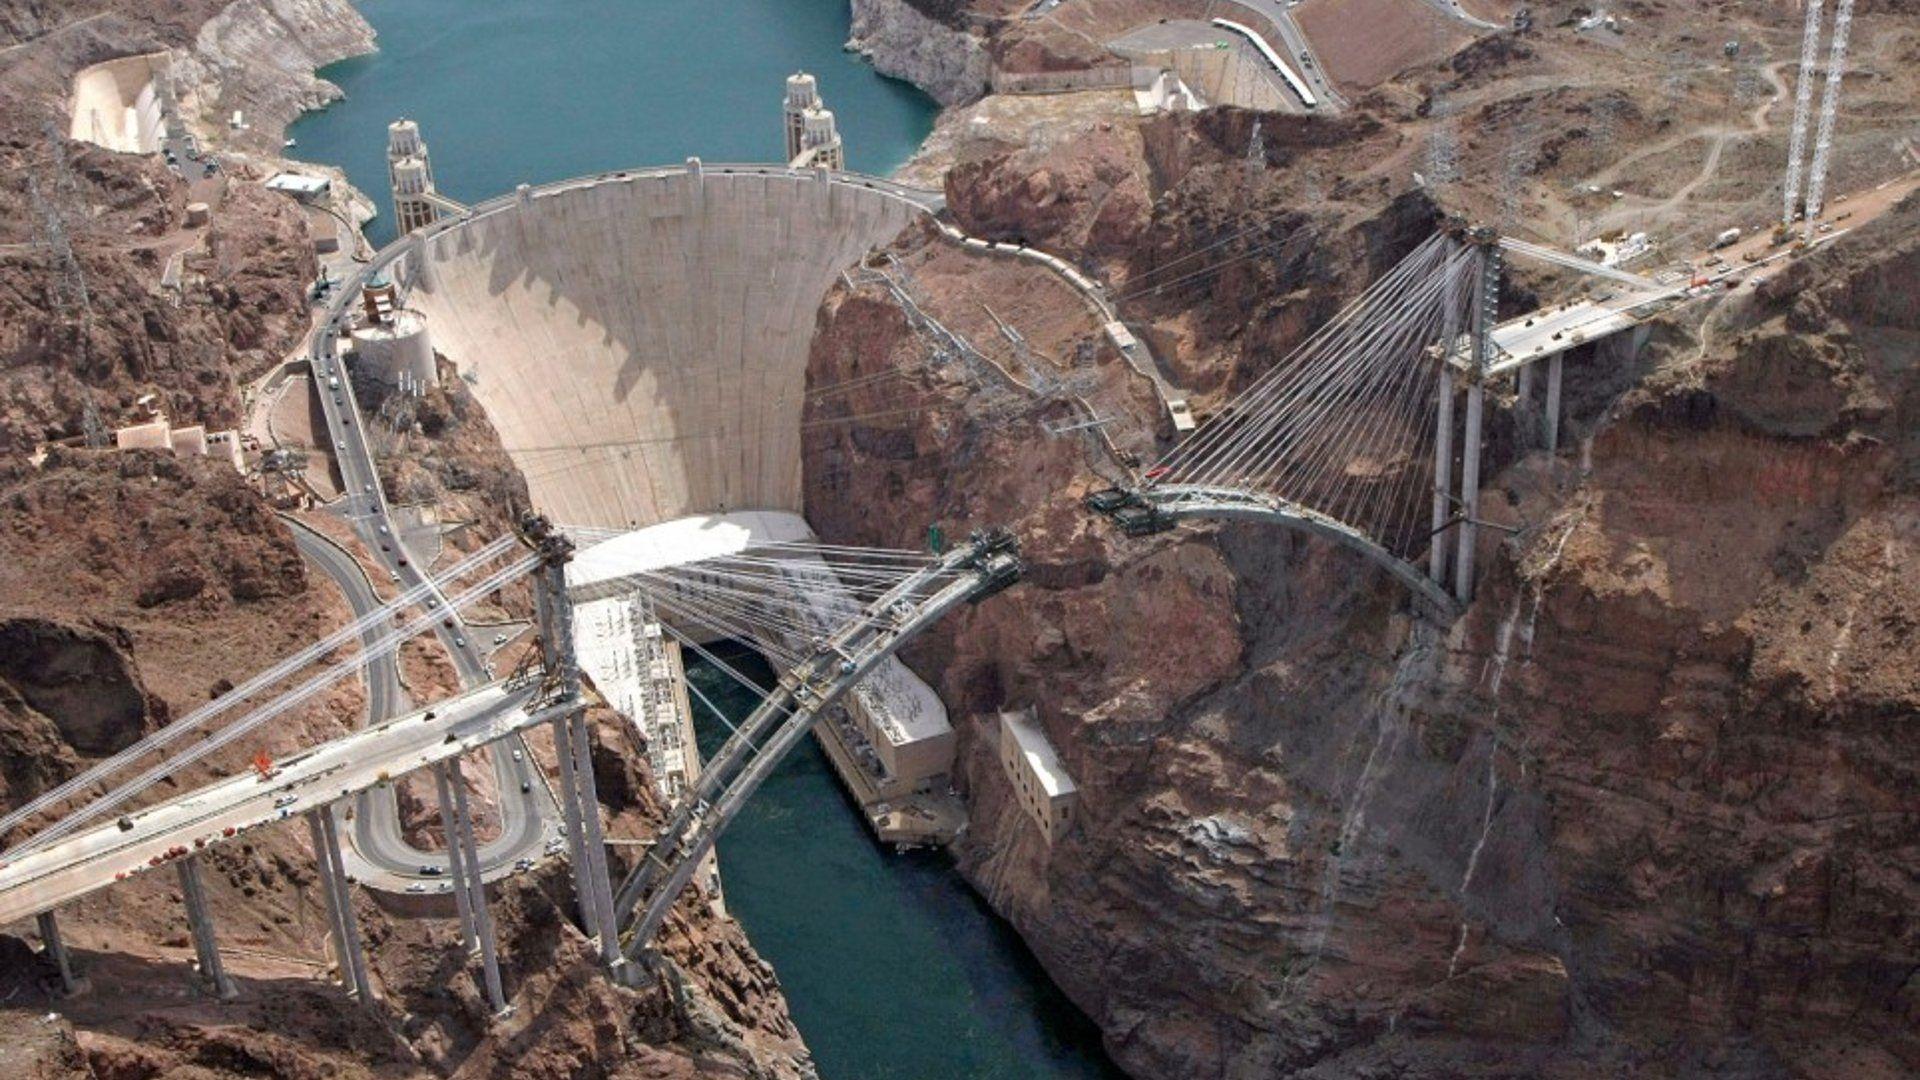 Known places: Hoover Dam Bypass, picture nr. 38560